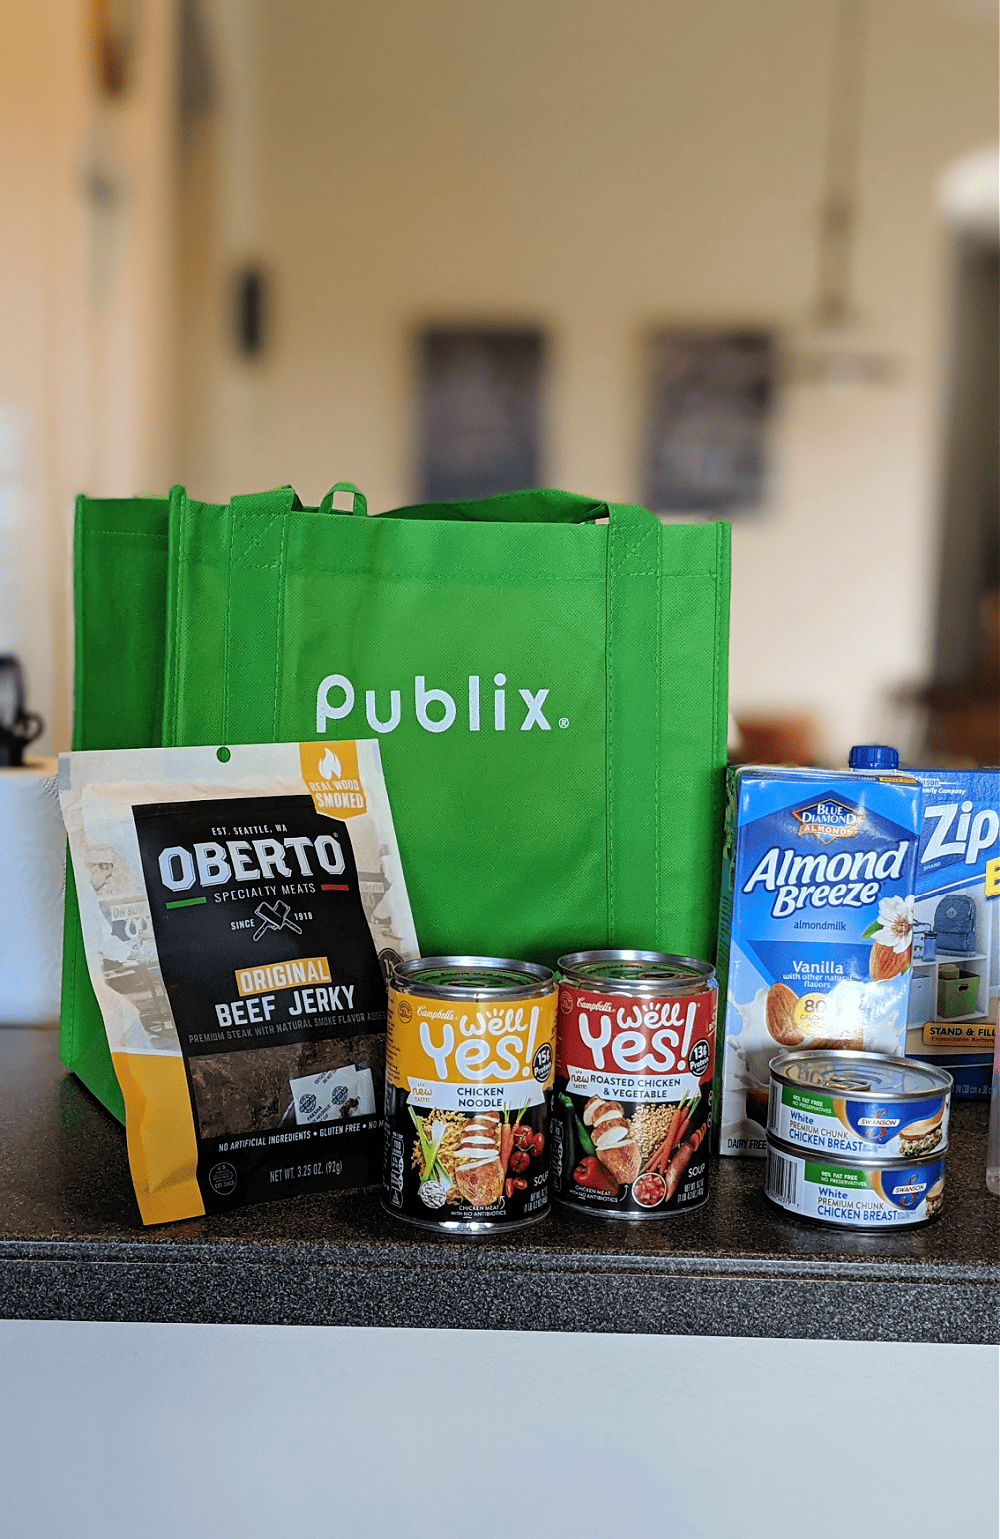 When it comes to disasters, having the right supplies can make a world of difference. Right now you can save big on your hurricane kit supplies during the Hurricane Prep promotion at Publix.